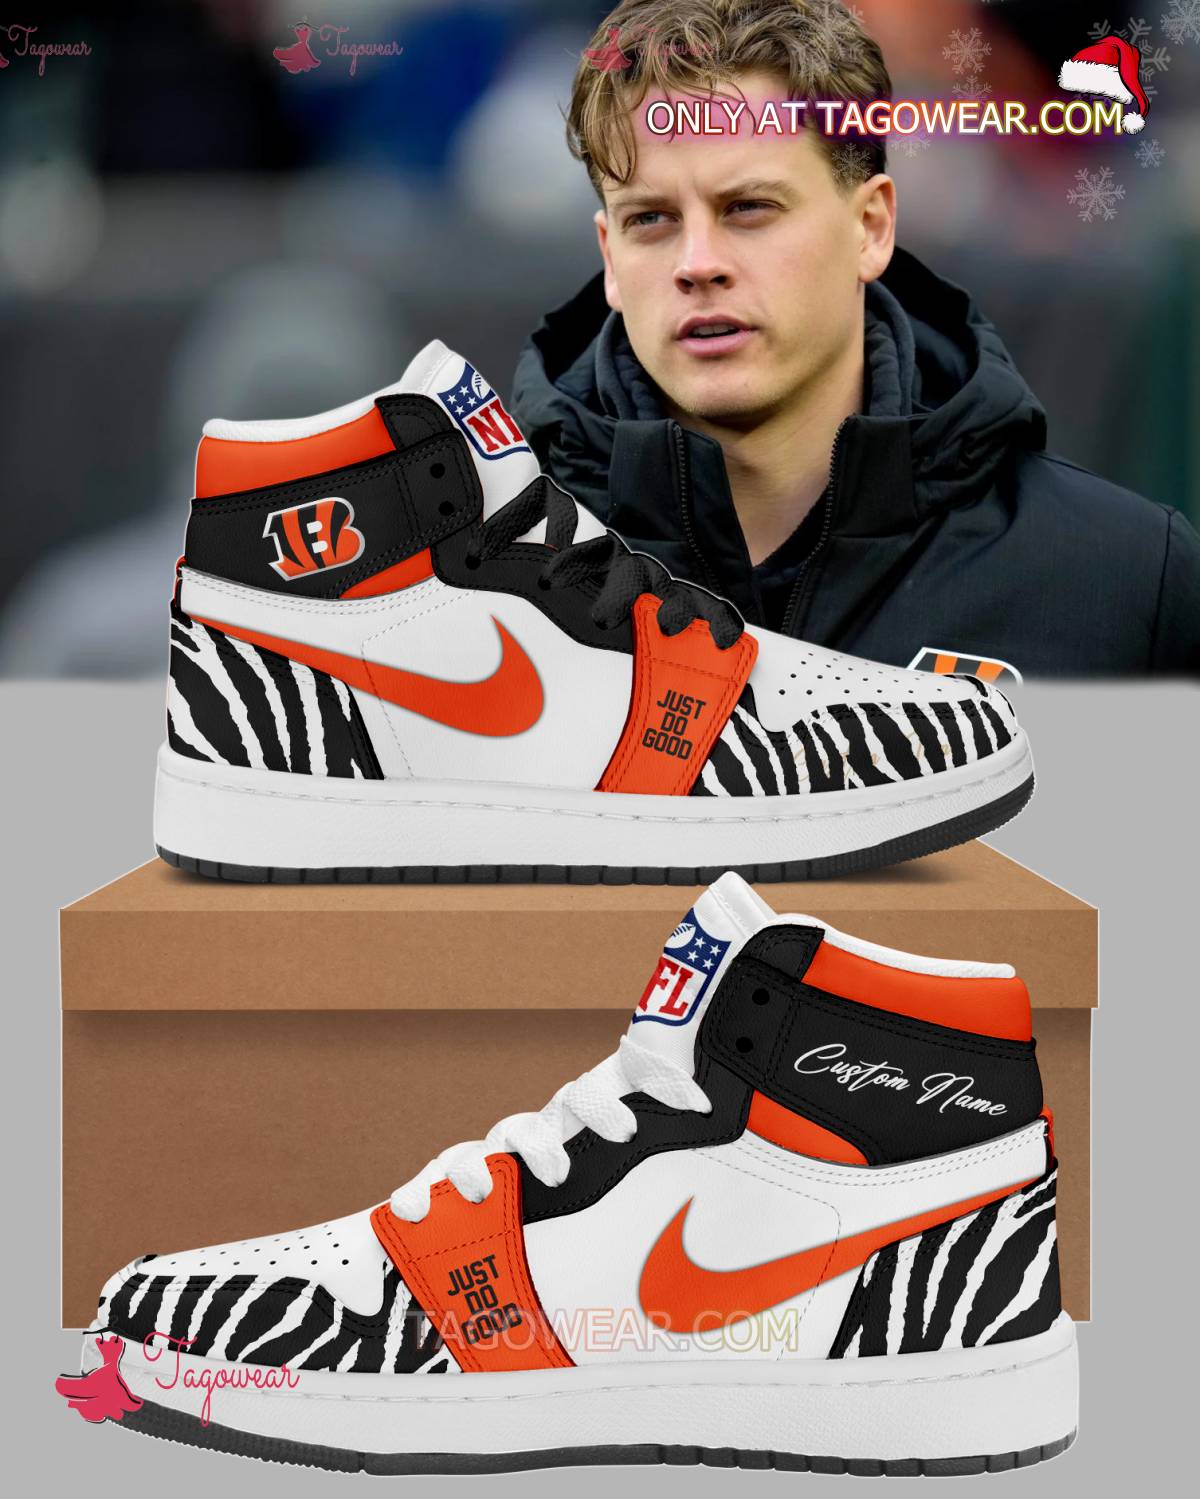 Joe Burrow My Cause My Cleats Just Do Good Personalized Air Jordan High Top Shoes